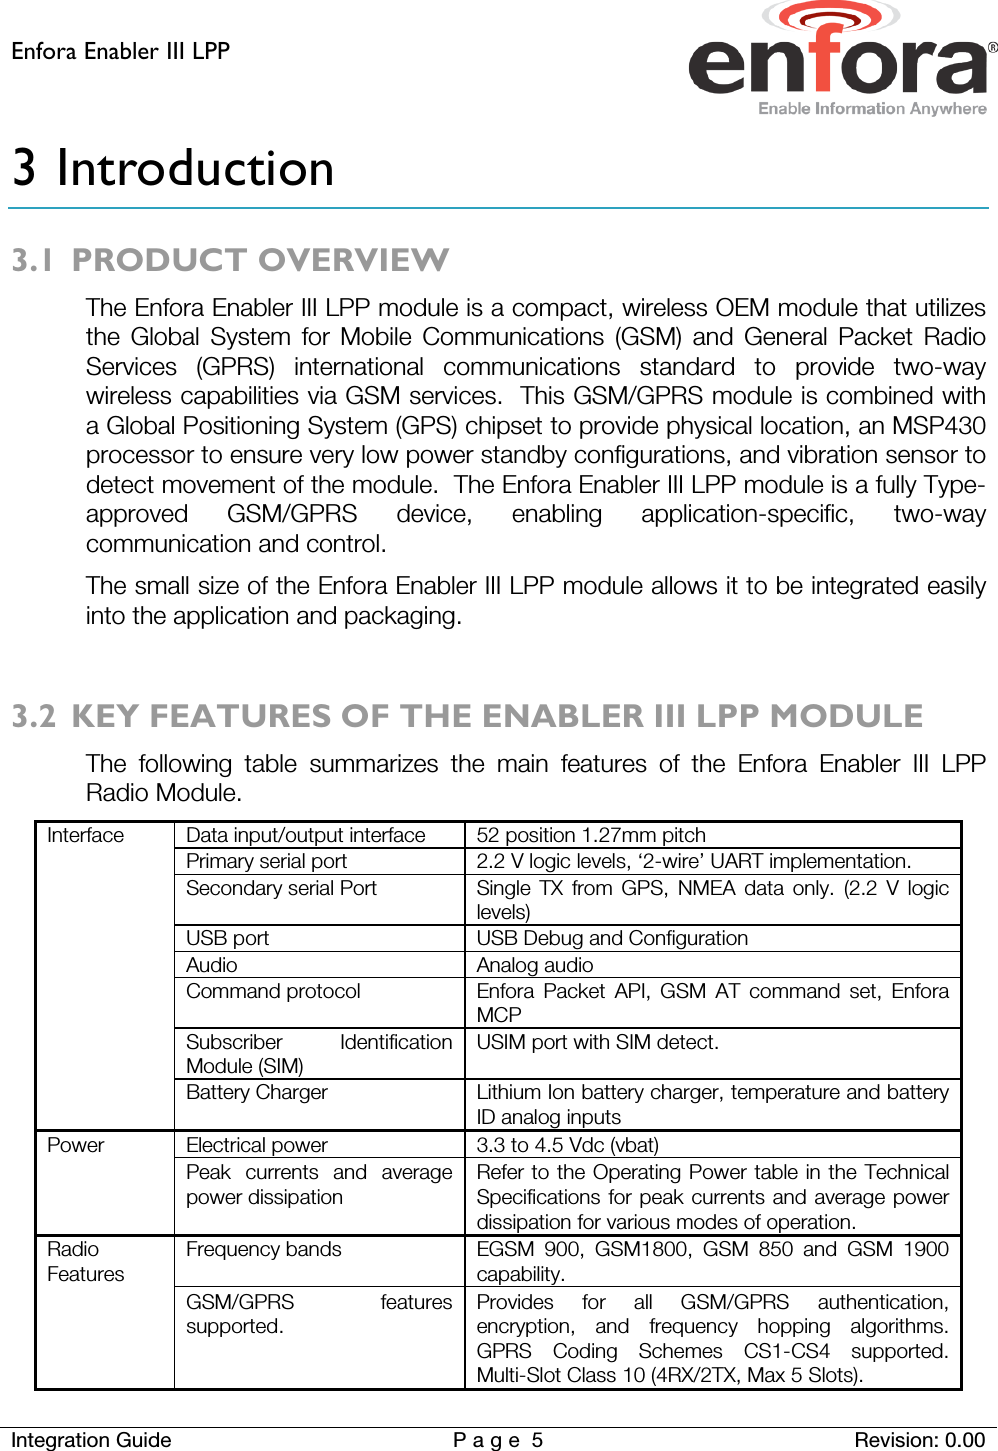 Enfora Enabler III LPP    Integration Guide Page 5  Revision: 0.00  3 Introduction 3.1 PRODUCT OVERVIEW The Enfora Enabler III LPP module is a compact, wireless OEM module that utilizes the Global System for Mobile Communications (GSM) and General Packet Radio Services (GPRS) international communications standard to provide two-way wireless capabilities via GSM services.  This GSM/GPRS module is combined with a Global Positioning System (GPS) chipset to provide physical location, an MSP430 processor to ensure very low power standby configurations, and vibration sensor to detect movement of the module.  The Enfora Enabler III LPP module is a fully Type-approved GSM/GPRS device, enabling application-specific, two-way communication and control.   The small size of the Enfora Enabler III LPP module allows it to be integrated easily into the application and packaging.  3.2 KEY FEATURES OF THE ENABLER III LPP MODULE The following table summarizes the main features of the Enfora Enabler III LPP Radio Module. Interface Data input/output interface 52 position 1.27mm pitch  Primary serial port 2.2 V logic levels, ‘2-wire’ UART implementation.   Secondary serial Port Single TX from GPS, NMEA data only. (2.2 V logic levels) USB port USB Debug and Configuration Audio Analog audio Command protocol Enfora Packet API, GSM AT command set, Enfora MCP Subscriber Identification Module (SIM) USIM port with SIM detect.   Battery Charger Lithium Ion battery charger, temperature and battery ID analog inputs Power   Electrical power 3.3 to 4.5 Vdc (vbat) Peak currents and average power dissipation Refer to the Operating Power table in the Technical Specifications for peak currents and average power dissipation for various modes of operation. Radio Features Frequency bands EGSM 900, GSM1800, GSM 850 and GSM 1900 capability. GSM/GPRS features supported.  Provides for all GSM/GPRS authentication, encryption, and frequency hopping algorithms.  GPRS Coding Schemes CS1-CS4  supported.  Multi-Slot Class 10 (4RX/2TX, Max 5 Slots). 